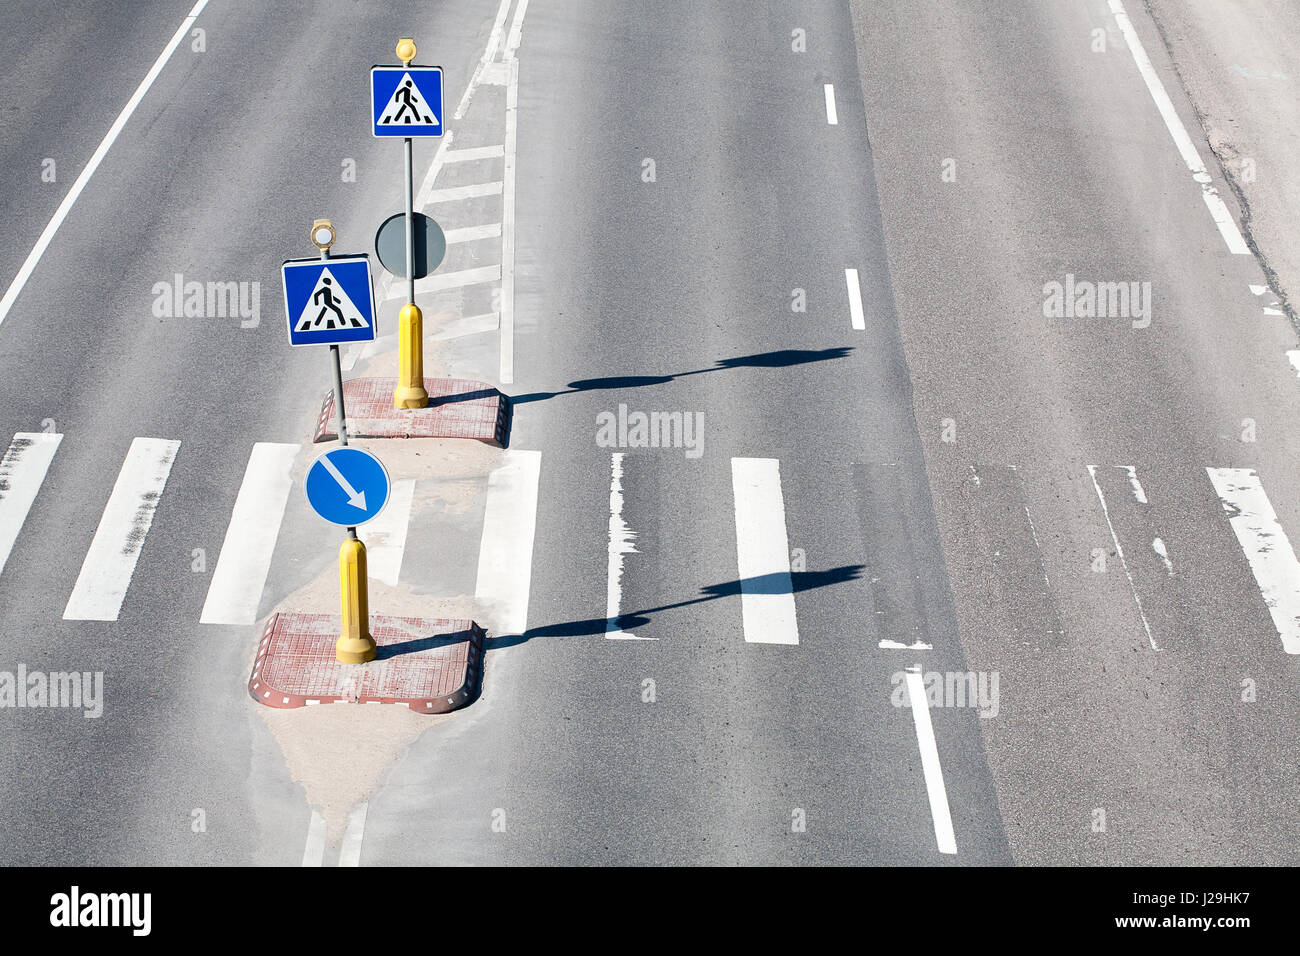 Zebra pattern pedestrian crossing with some road signs Stock Photo